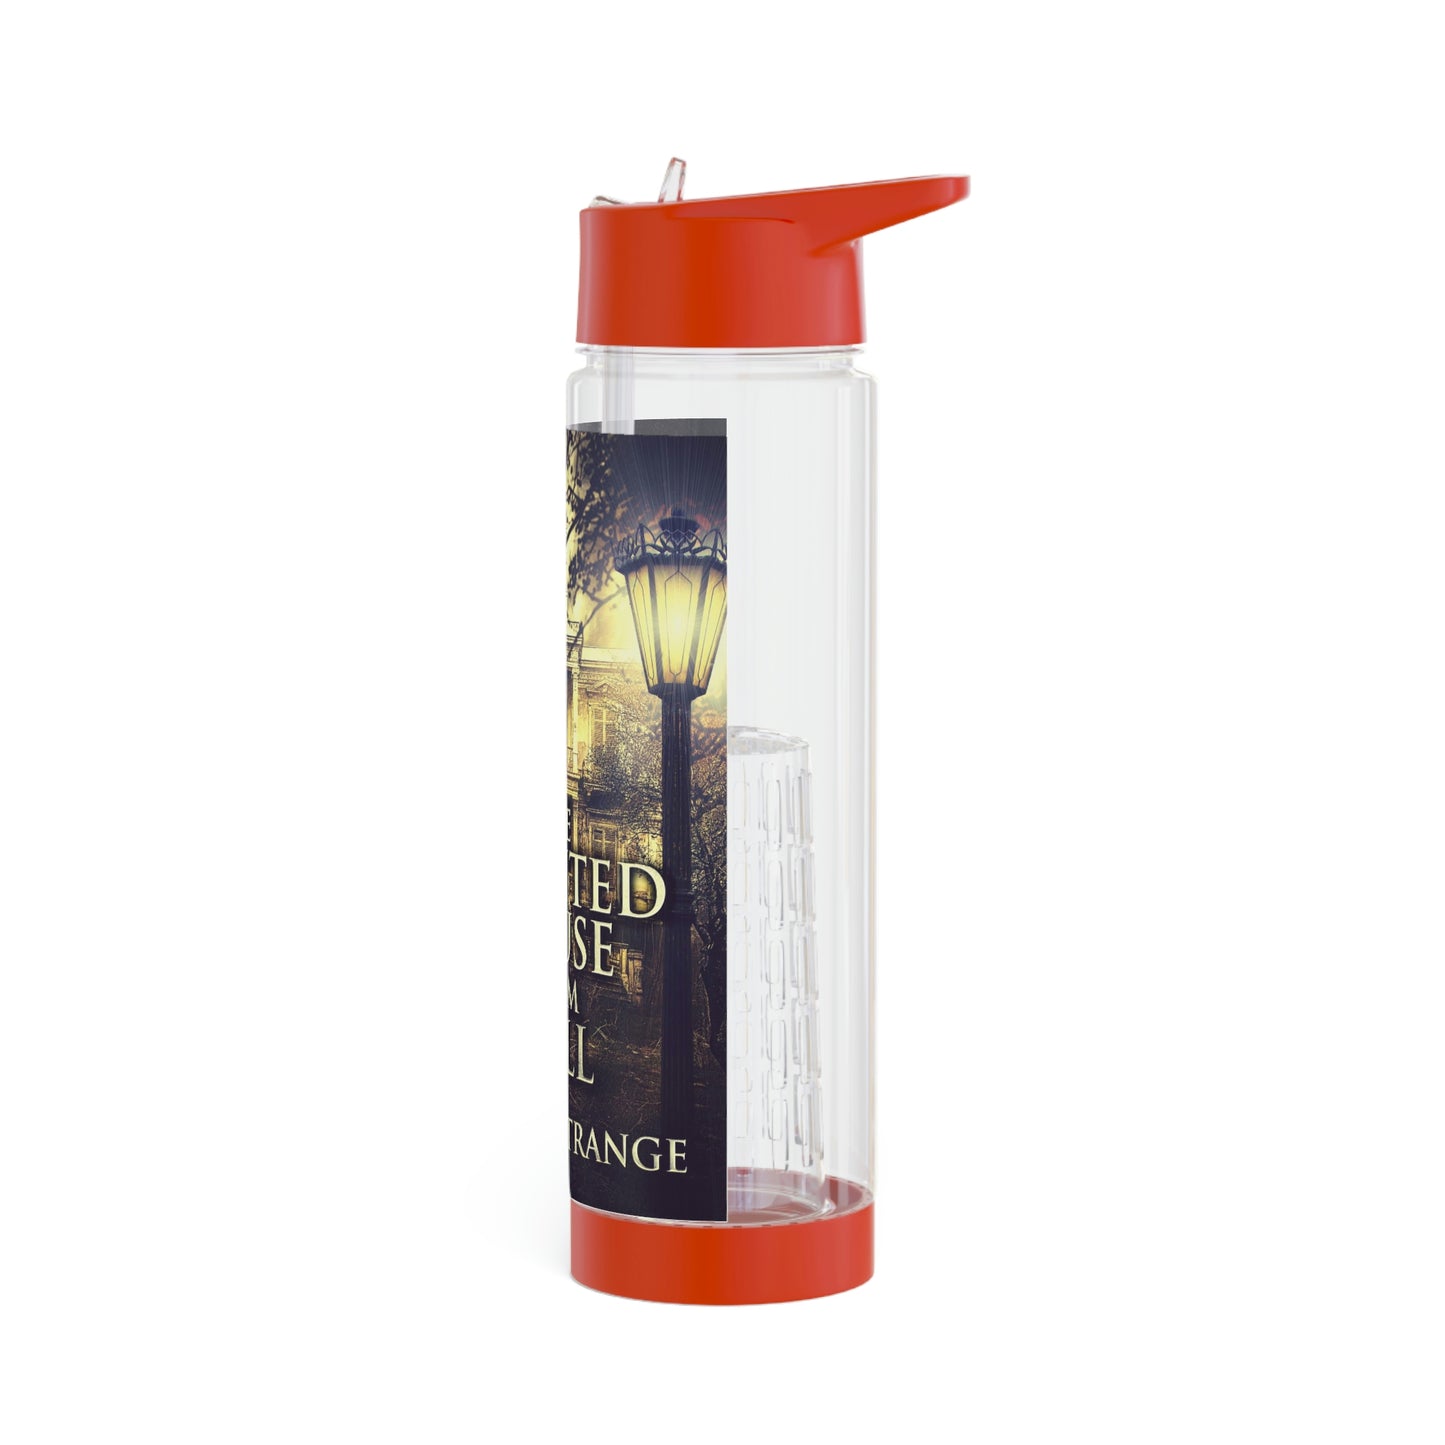 The Haunted House From Hell - Infuser Water Bottle